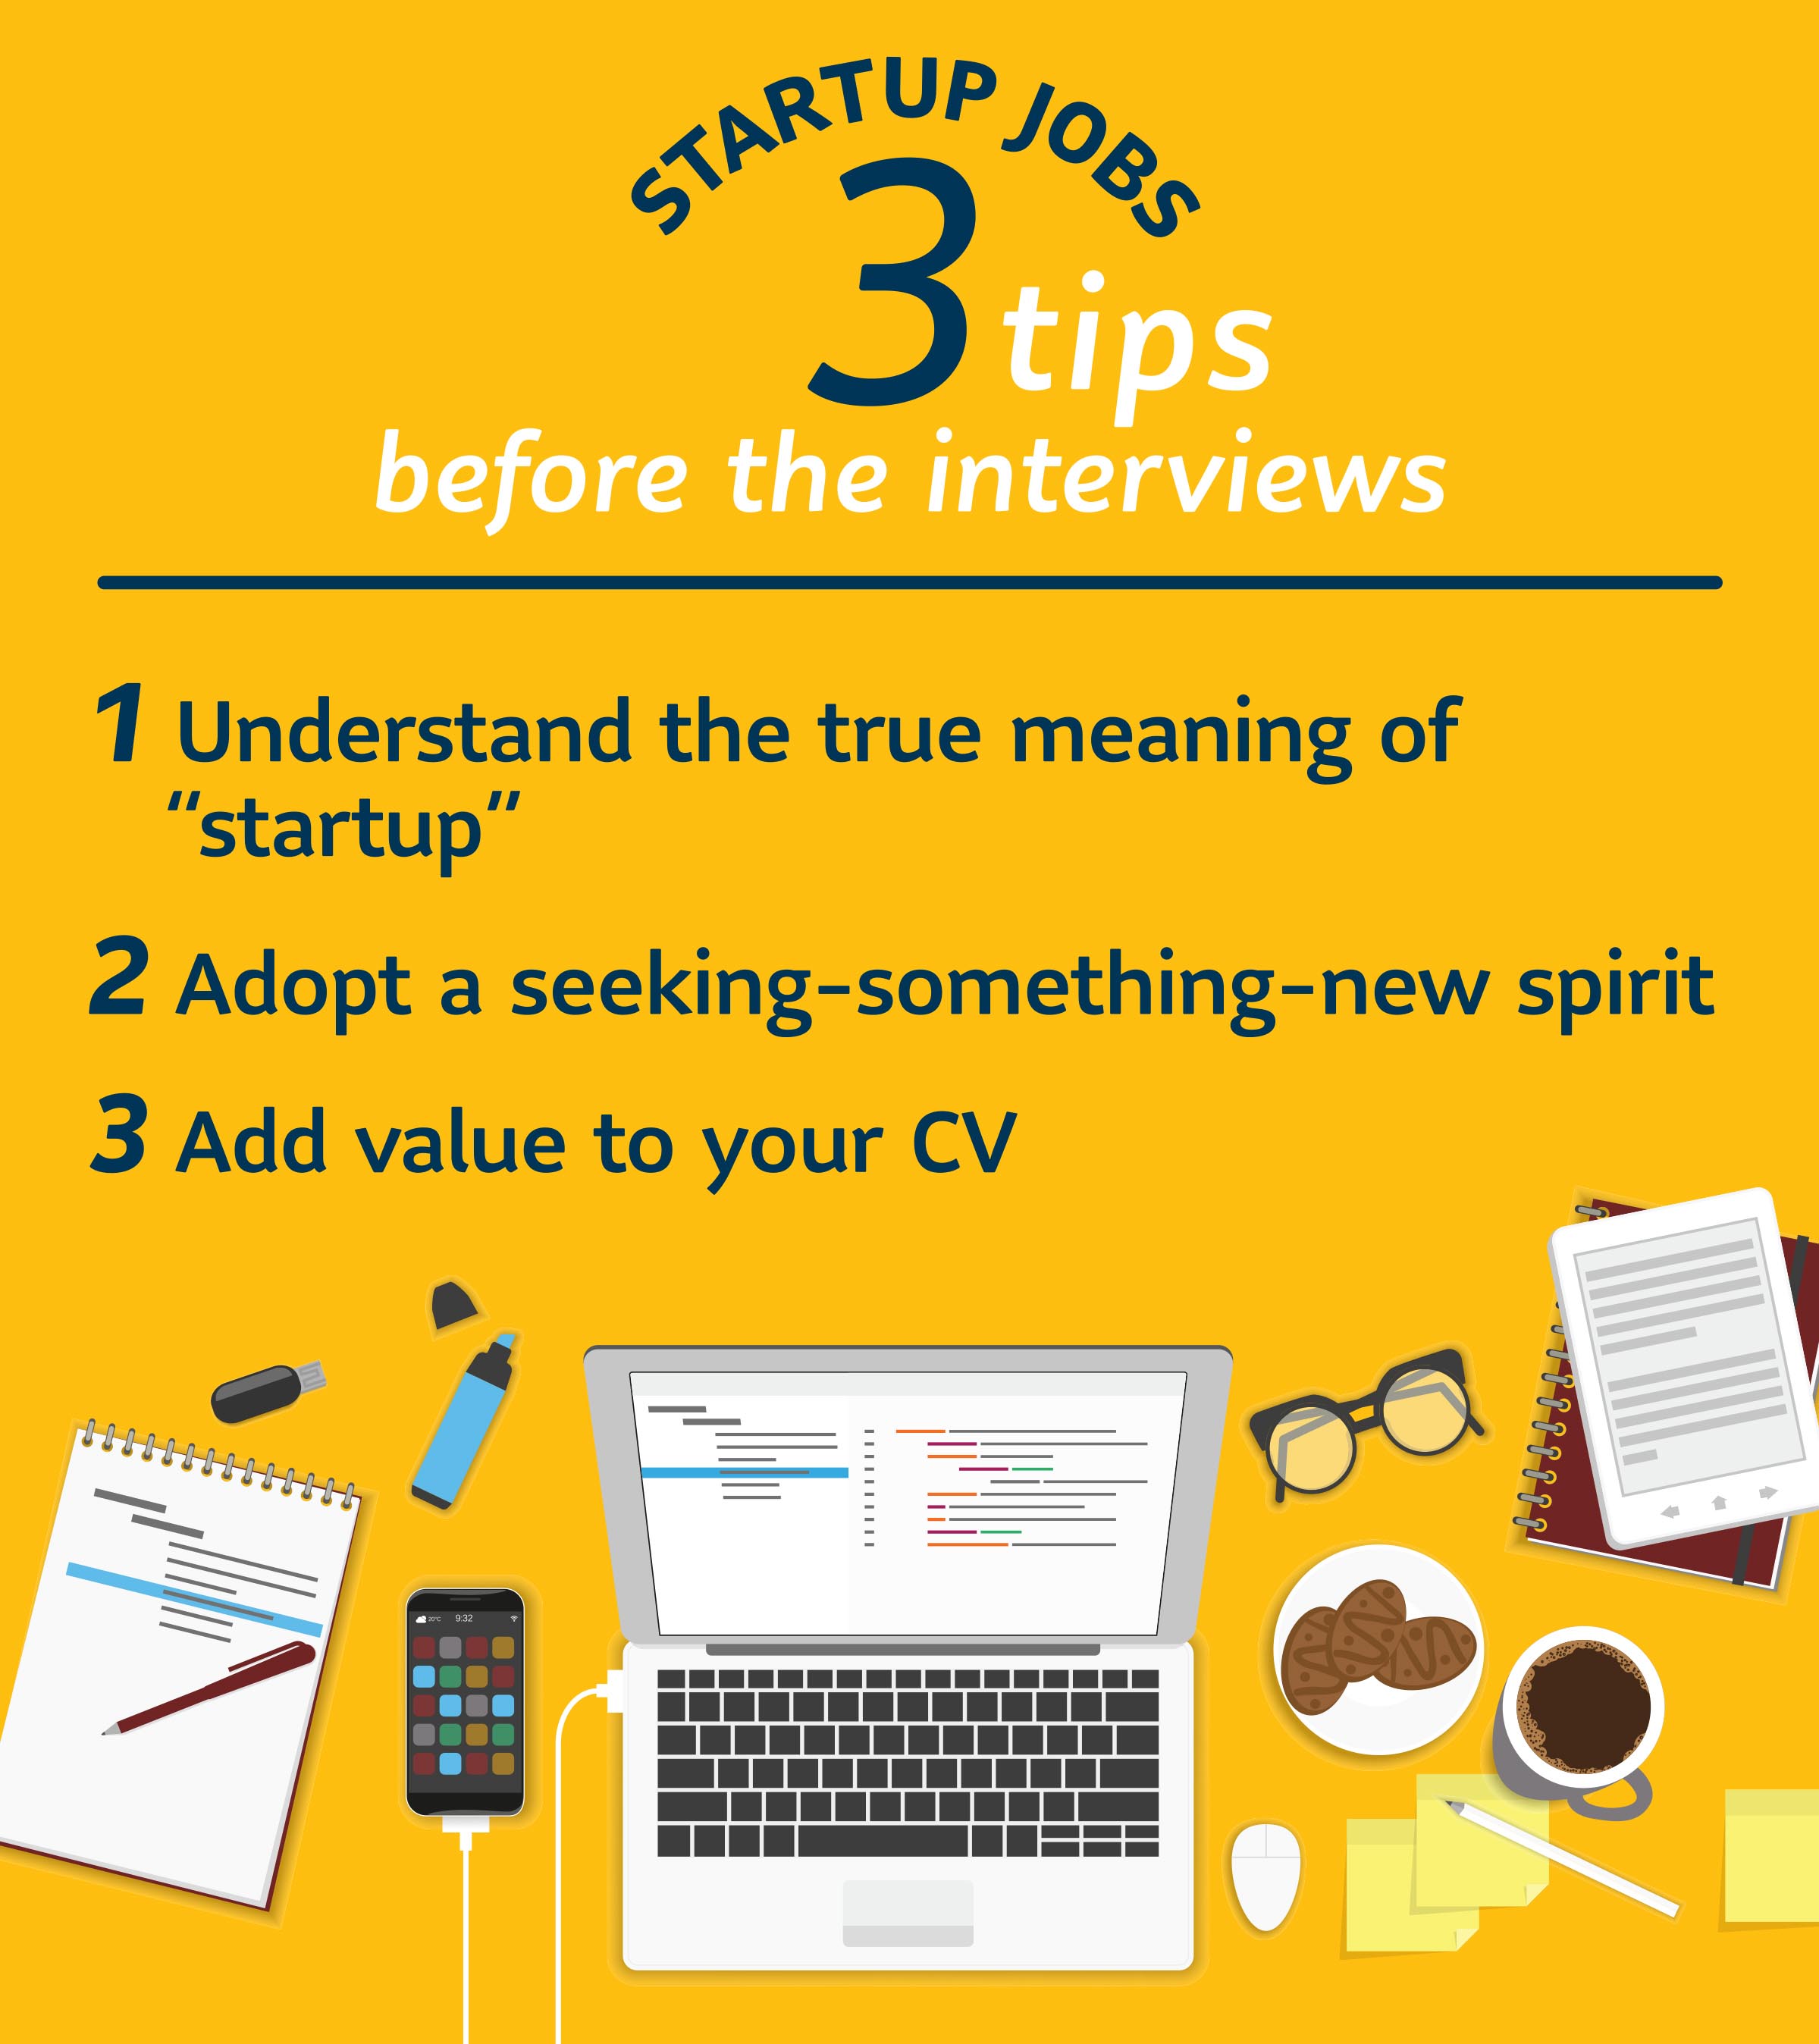 3 tips before interviewing for a startup job